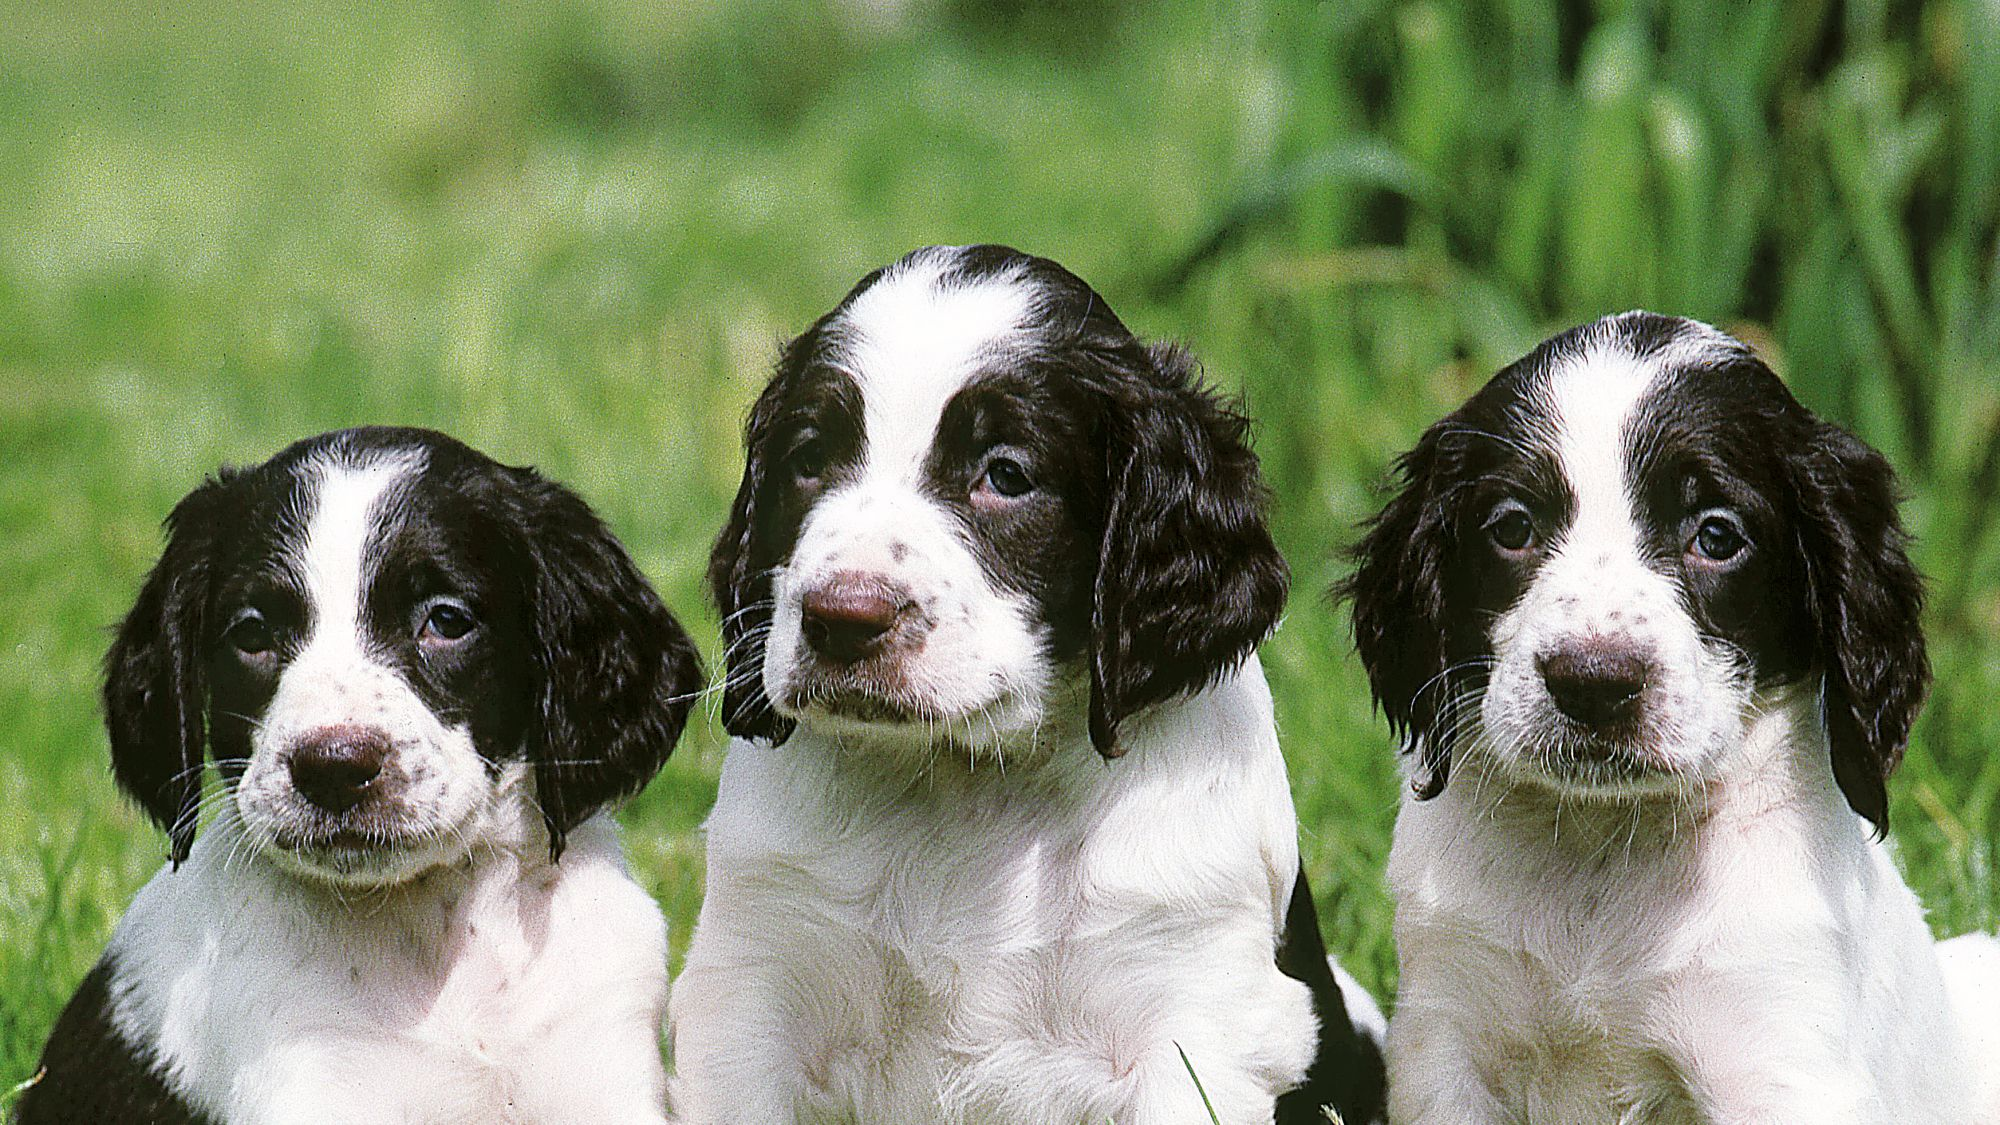 Three young French Spaniel puppies sat in a row in grass